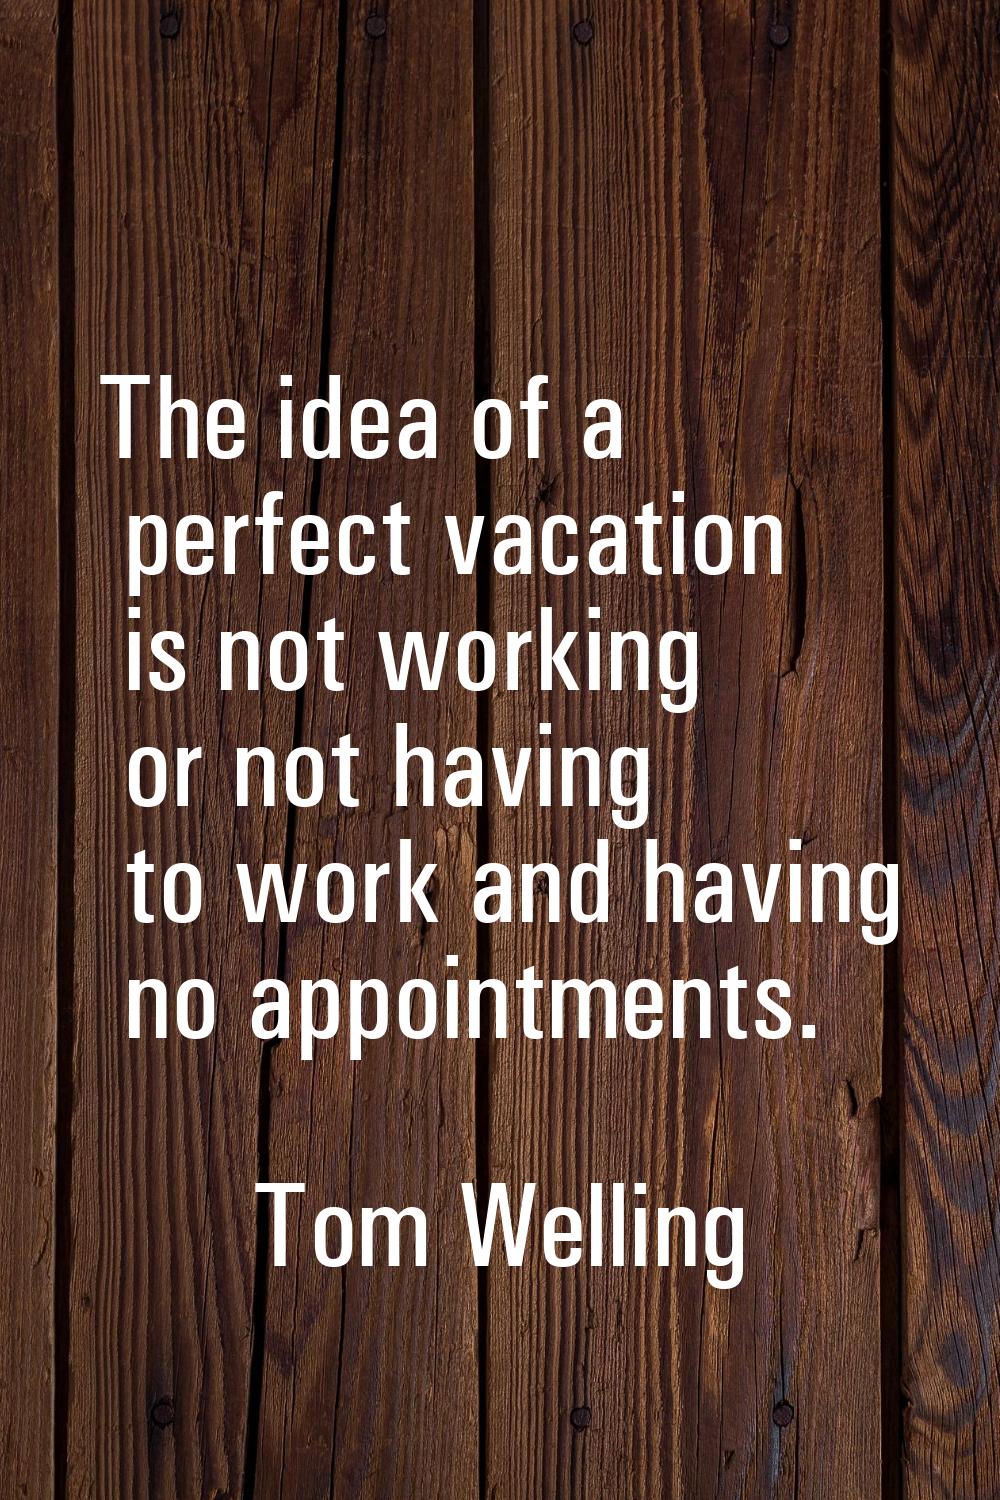 The idea of a perfect vacation is not working or not having to work and having no appointments.